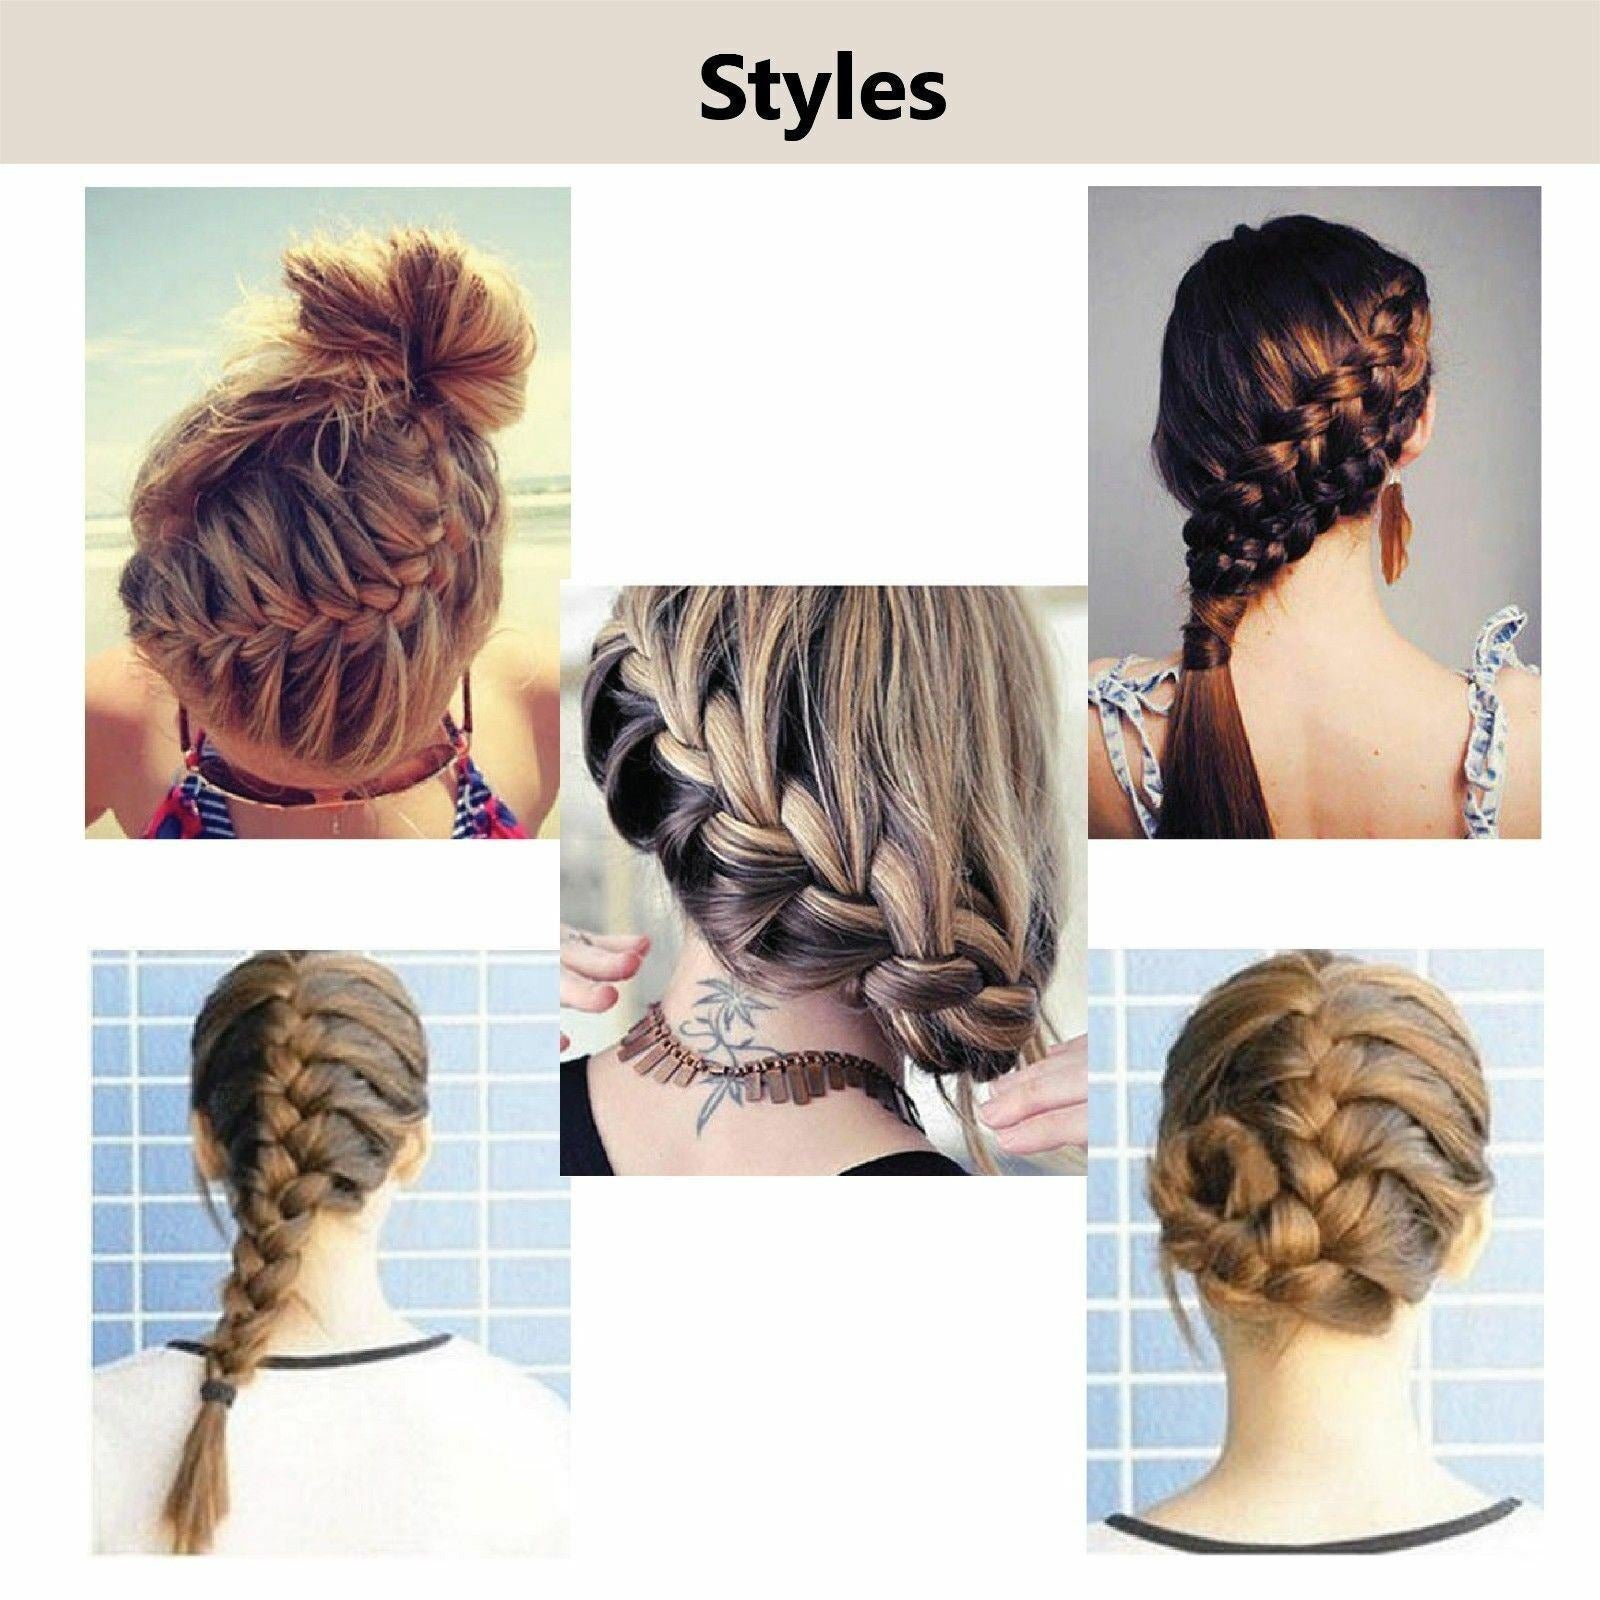 differently styled hair with Hair Braiding Tool